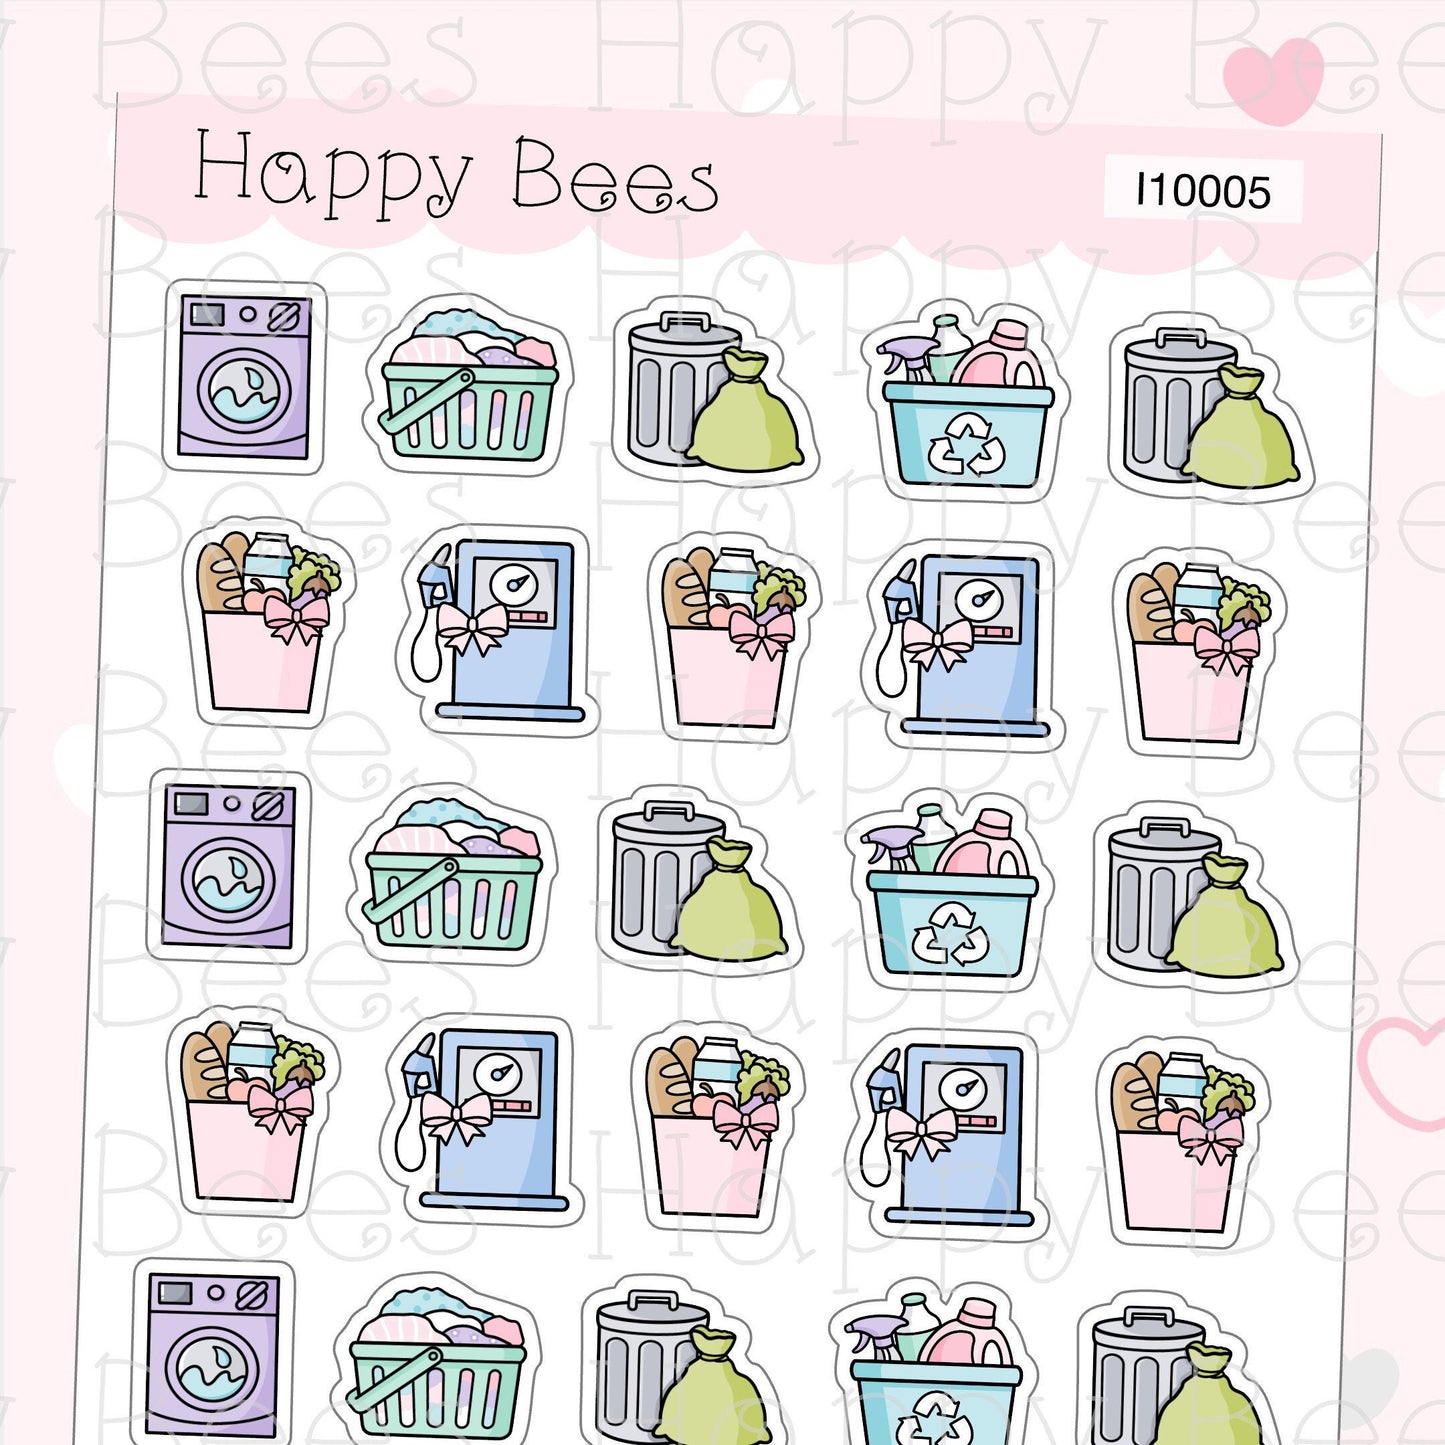 Chores Icons Vol.2 - Functional Cute Doodles Planner Stickers I10005